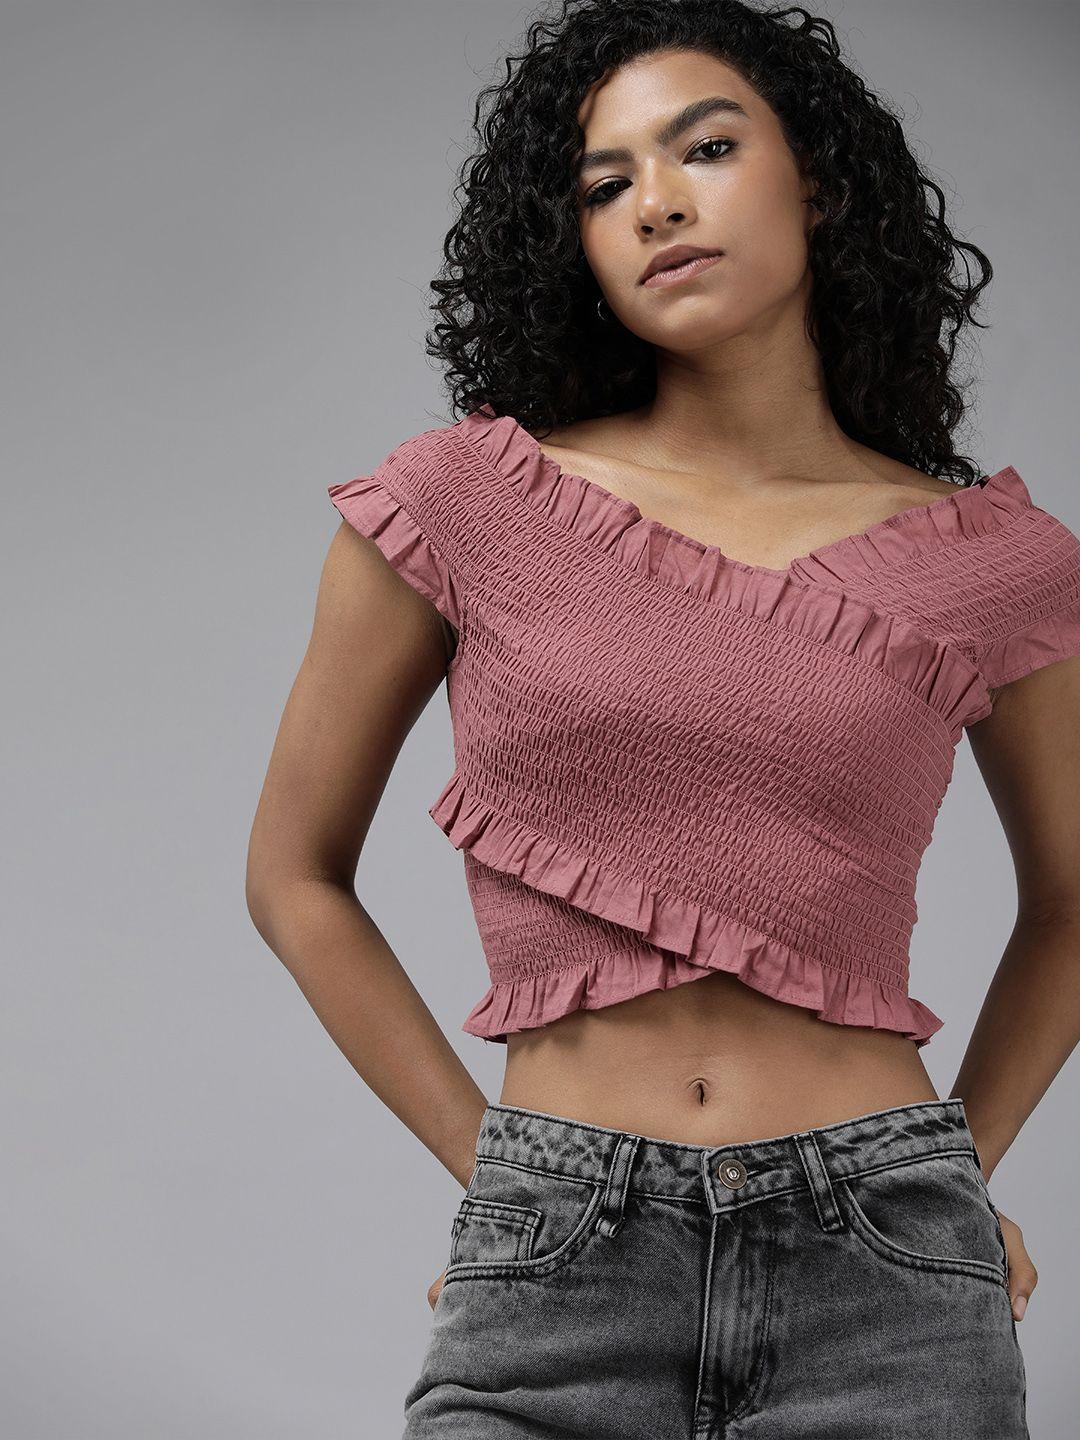 the-roadster-lifestyle-co.-ruffles-smocked-pure-cotton-crop-top